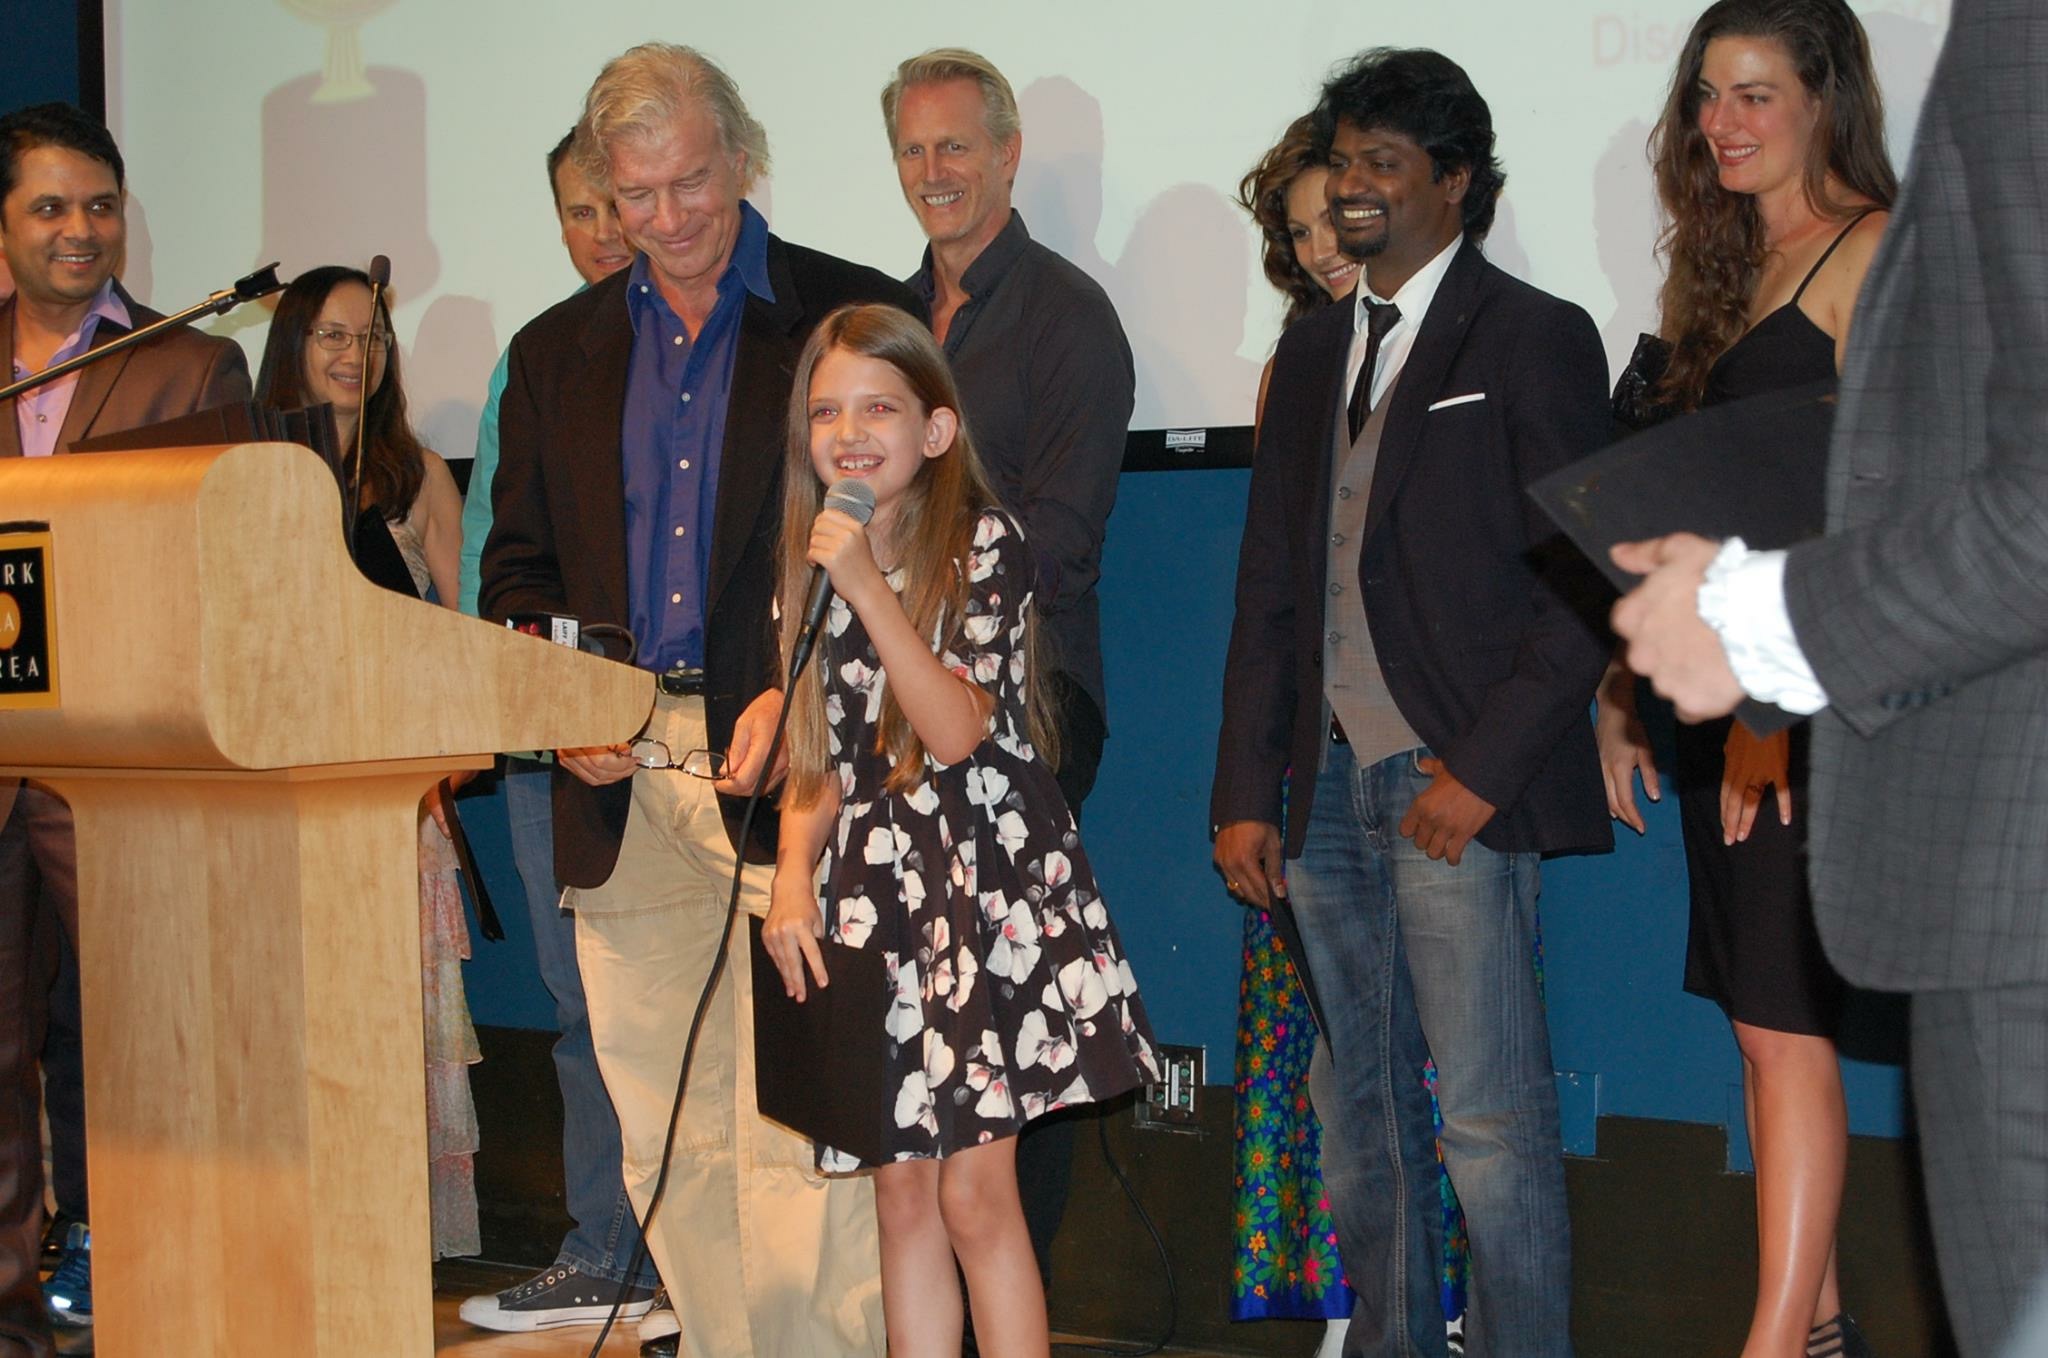 Carissa Bazler Best Youth Actress award acceptance at LA Indy Film Festival